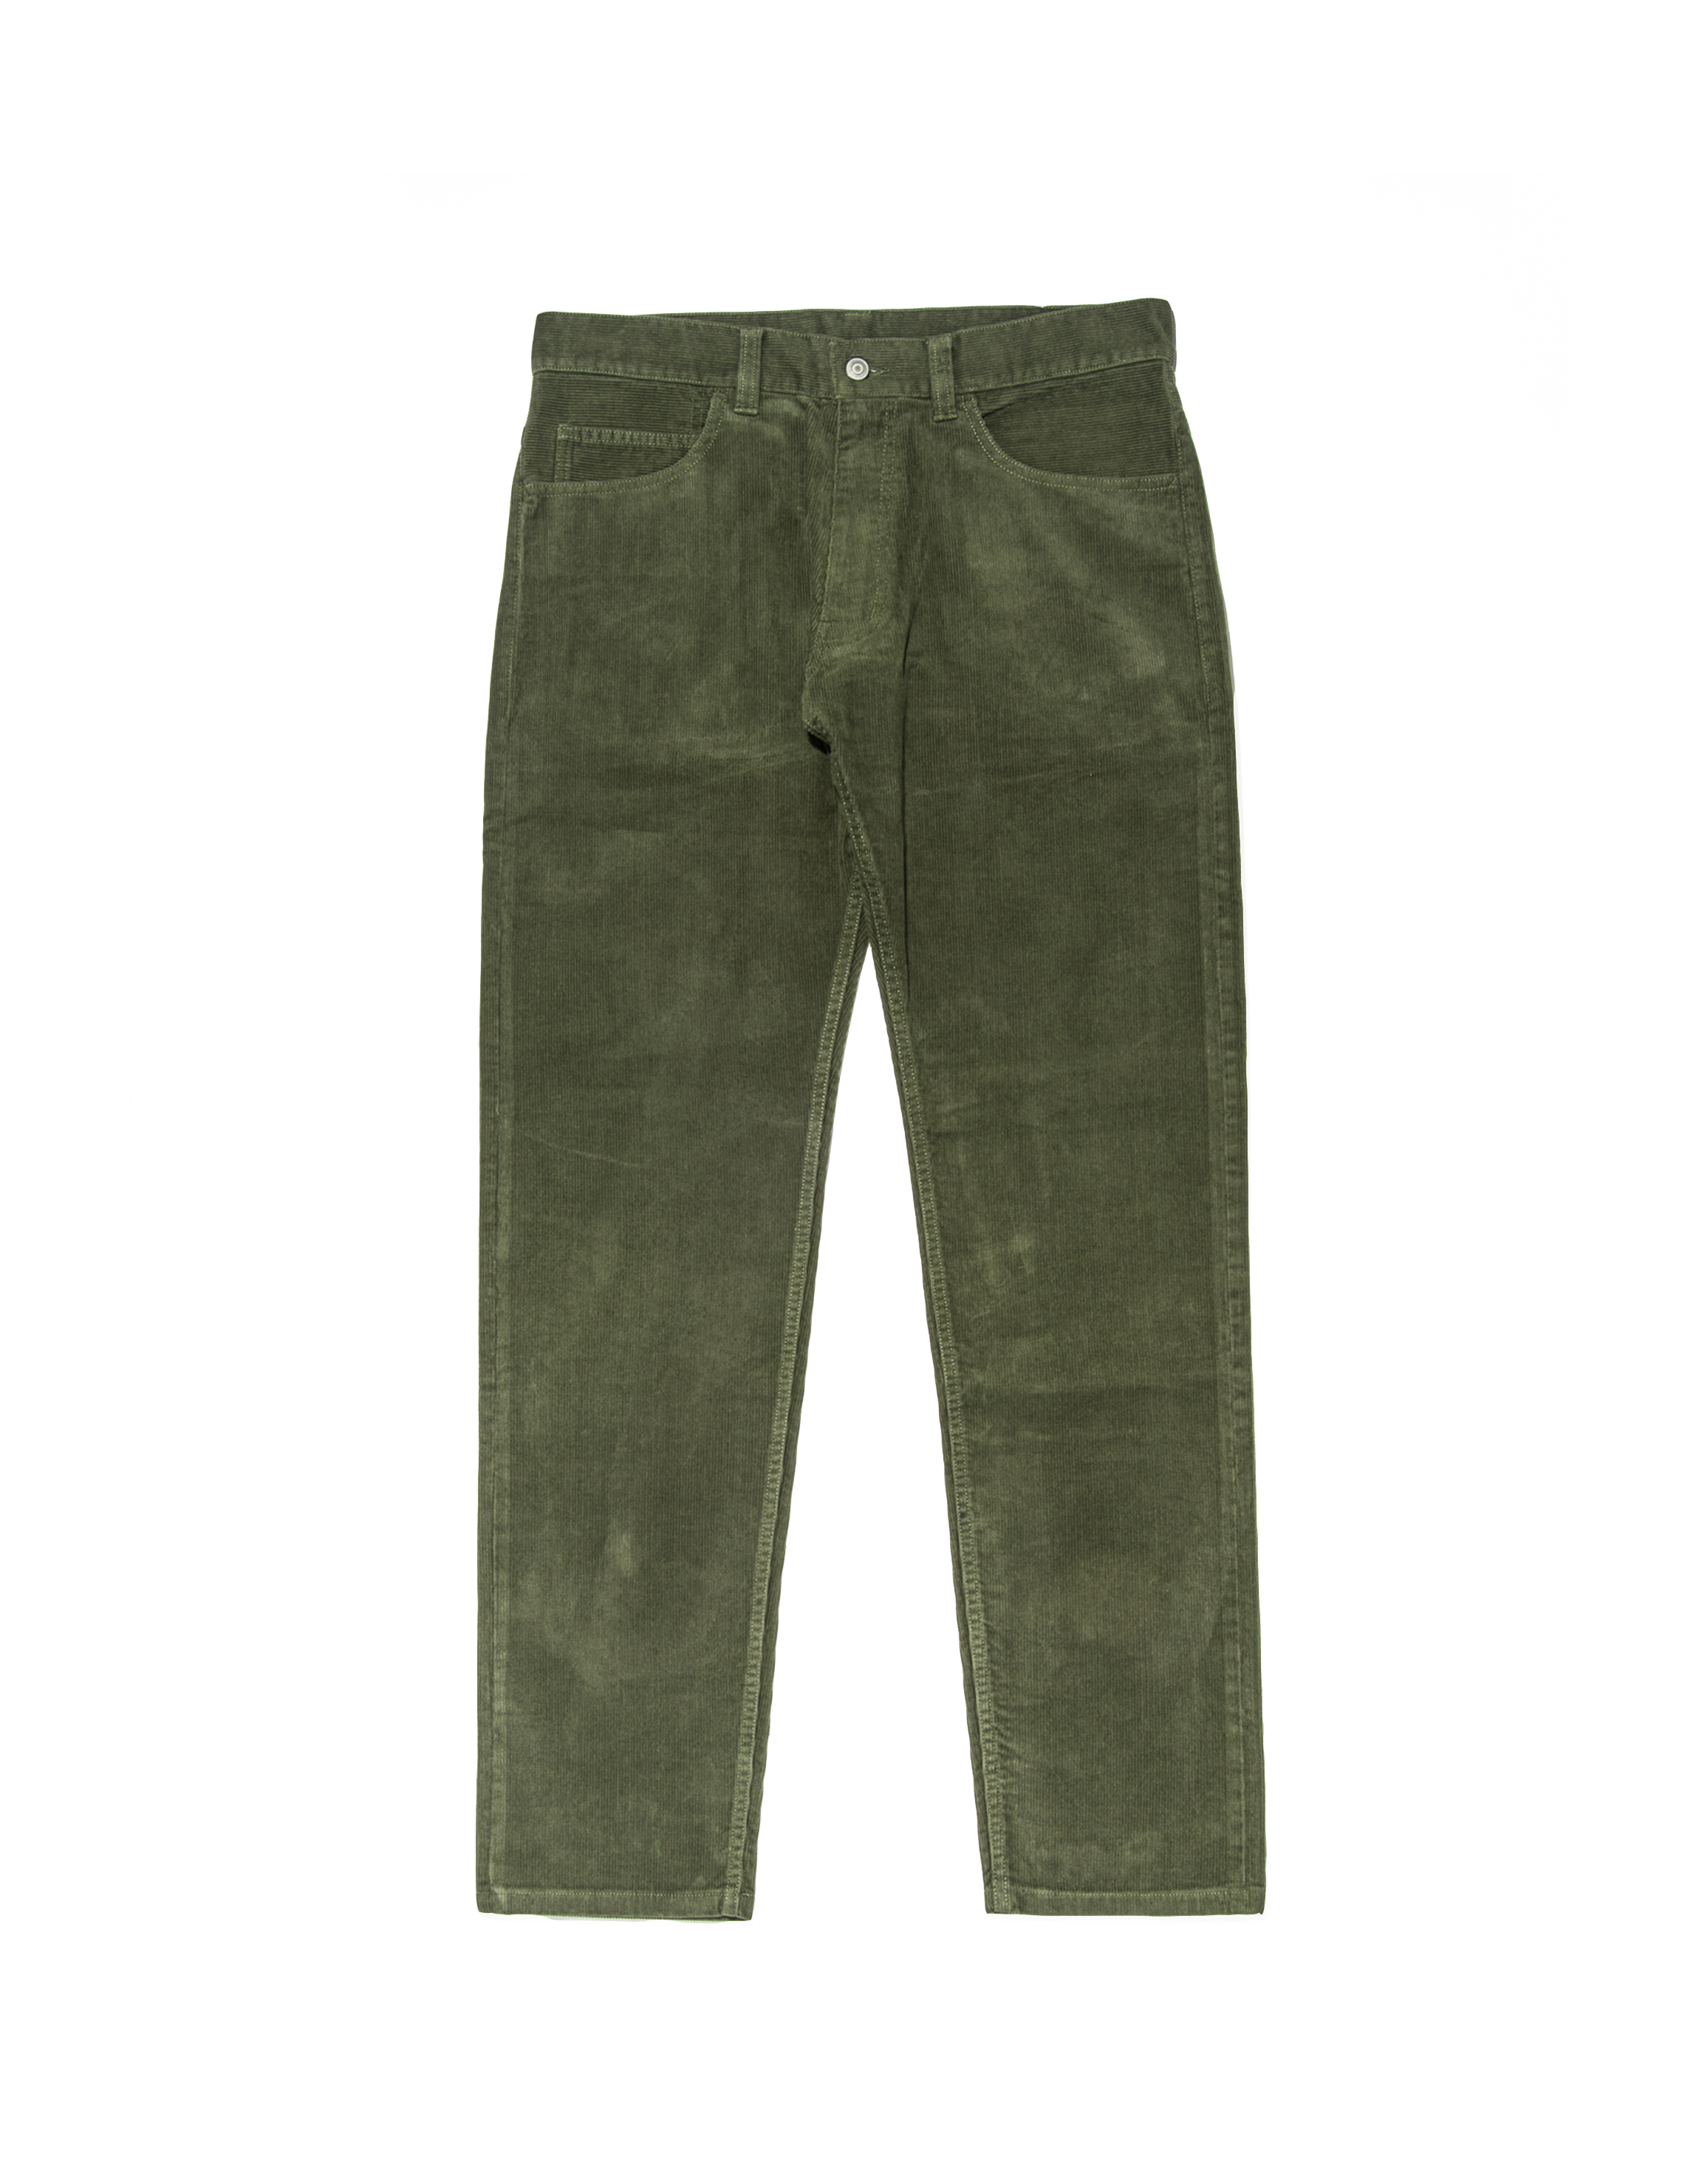 Relco Mod Sta Press Trousers Prince Wales Check | Adaptor Clothing